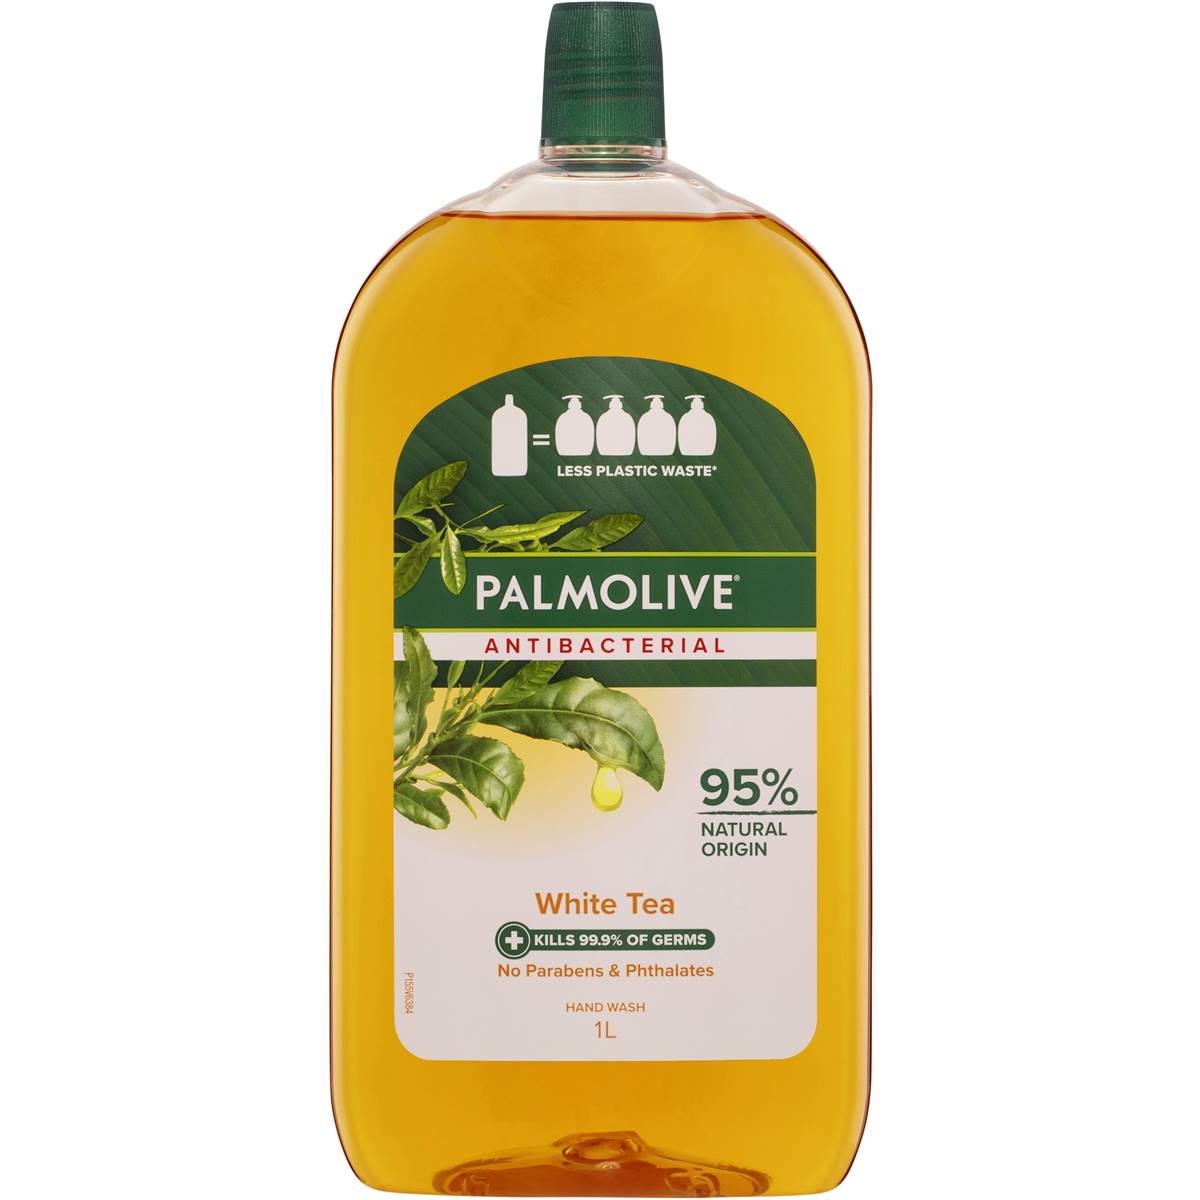 Palmolive Antibacterial Hand Wash Refill White Tea 1L